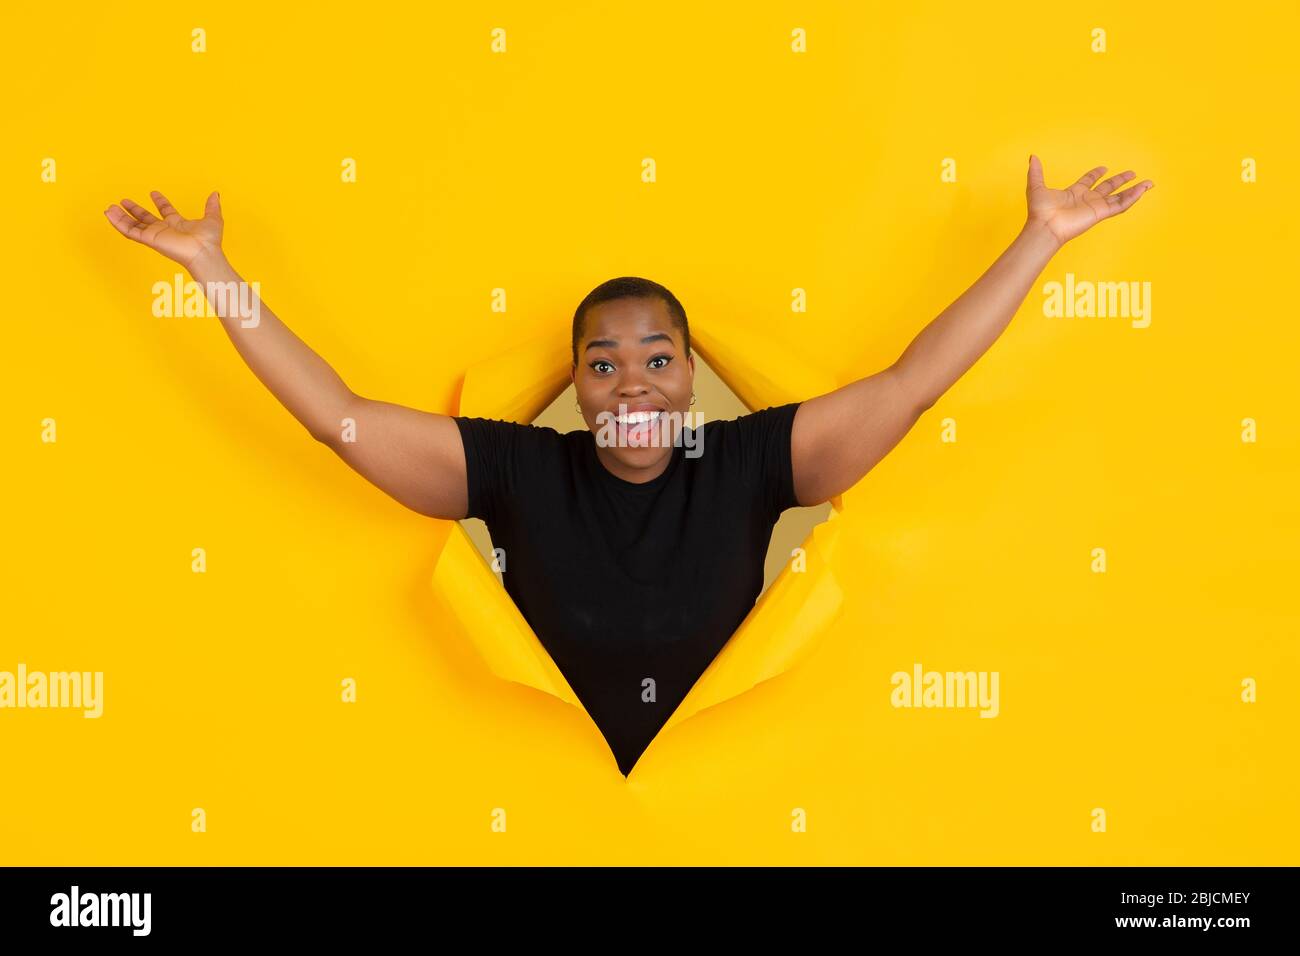 Happy Greeting Cheerful African American Young Woman Poses In Torn Yellow Paper Background Emotional Expressive Breaking On Breakthrought Concept Of Human Emotions Facial Expression Sales Ad Stock Photo Alamy